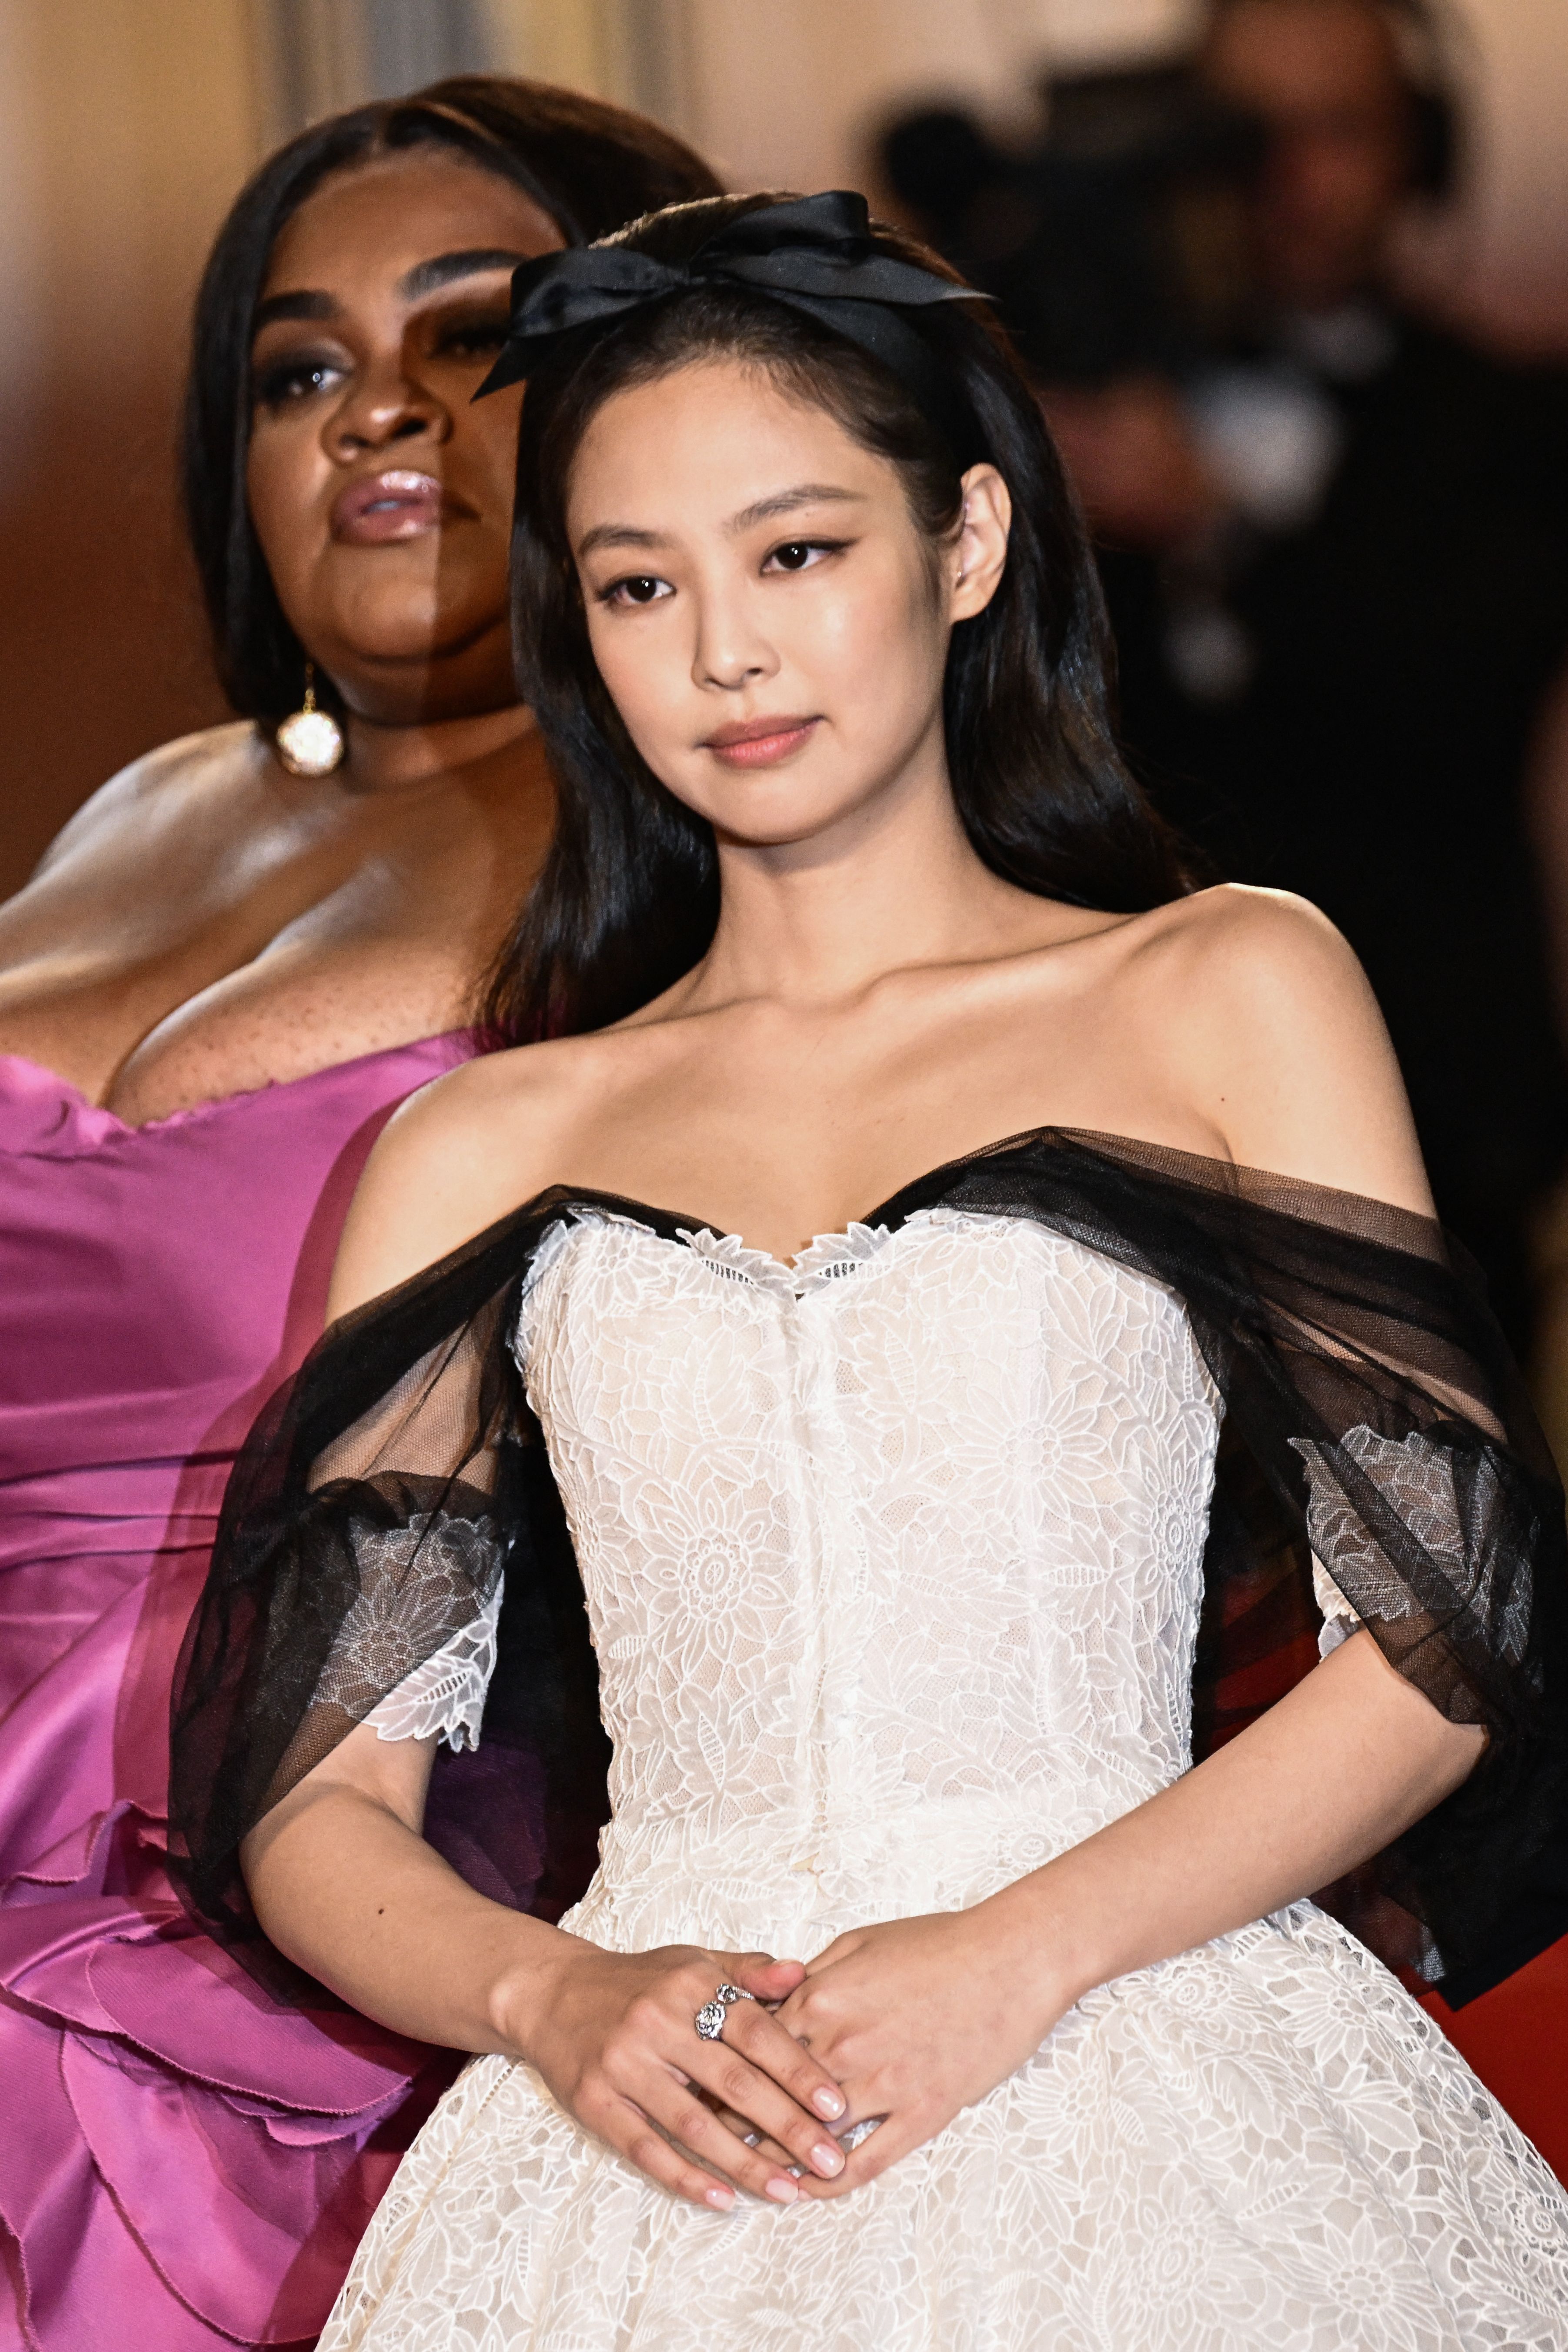 Jennie Wore a Debutantecore Chanel Wedding Dress on the Cannes Red Carpet